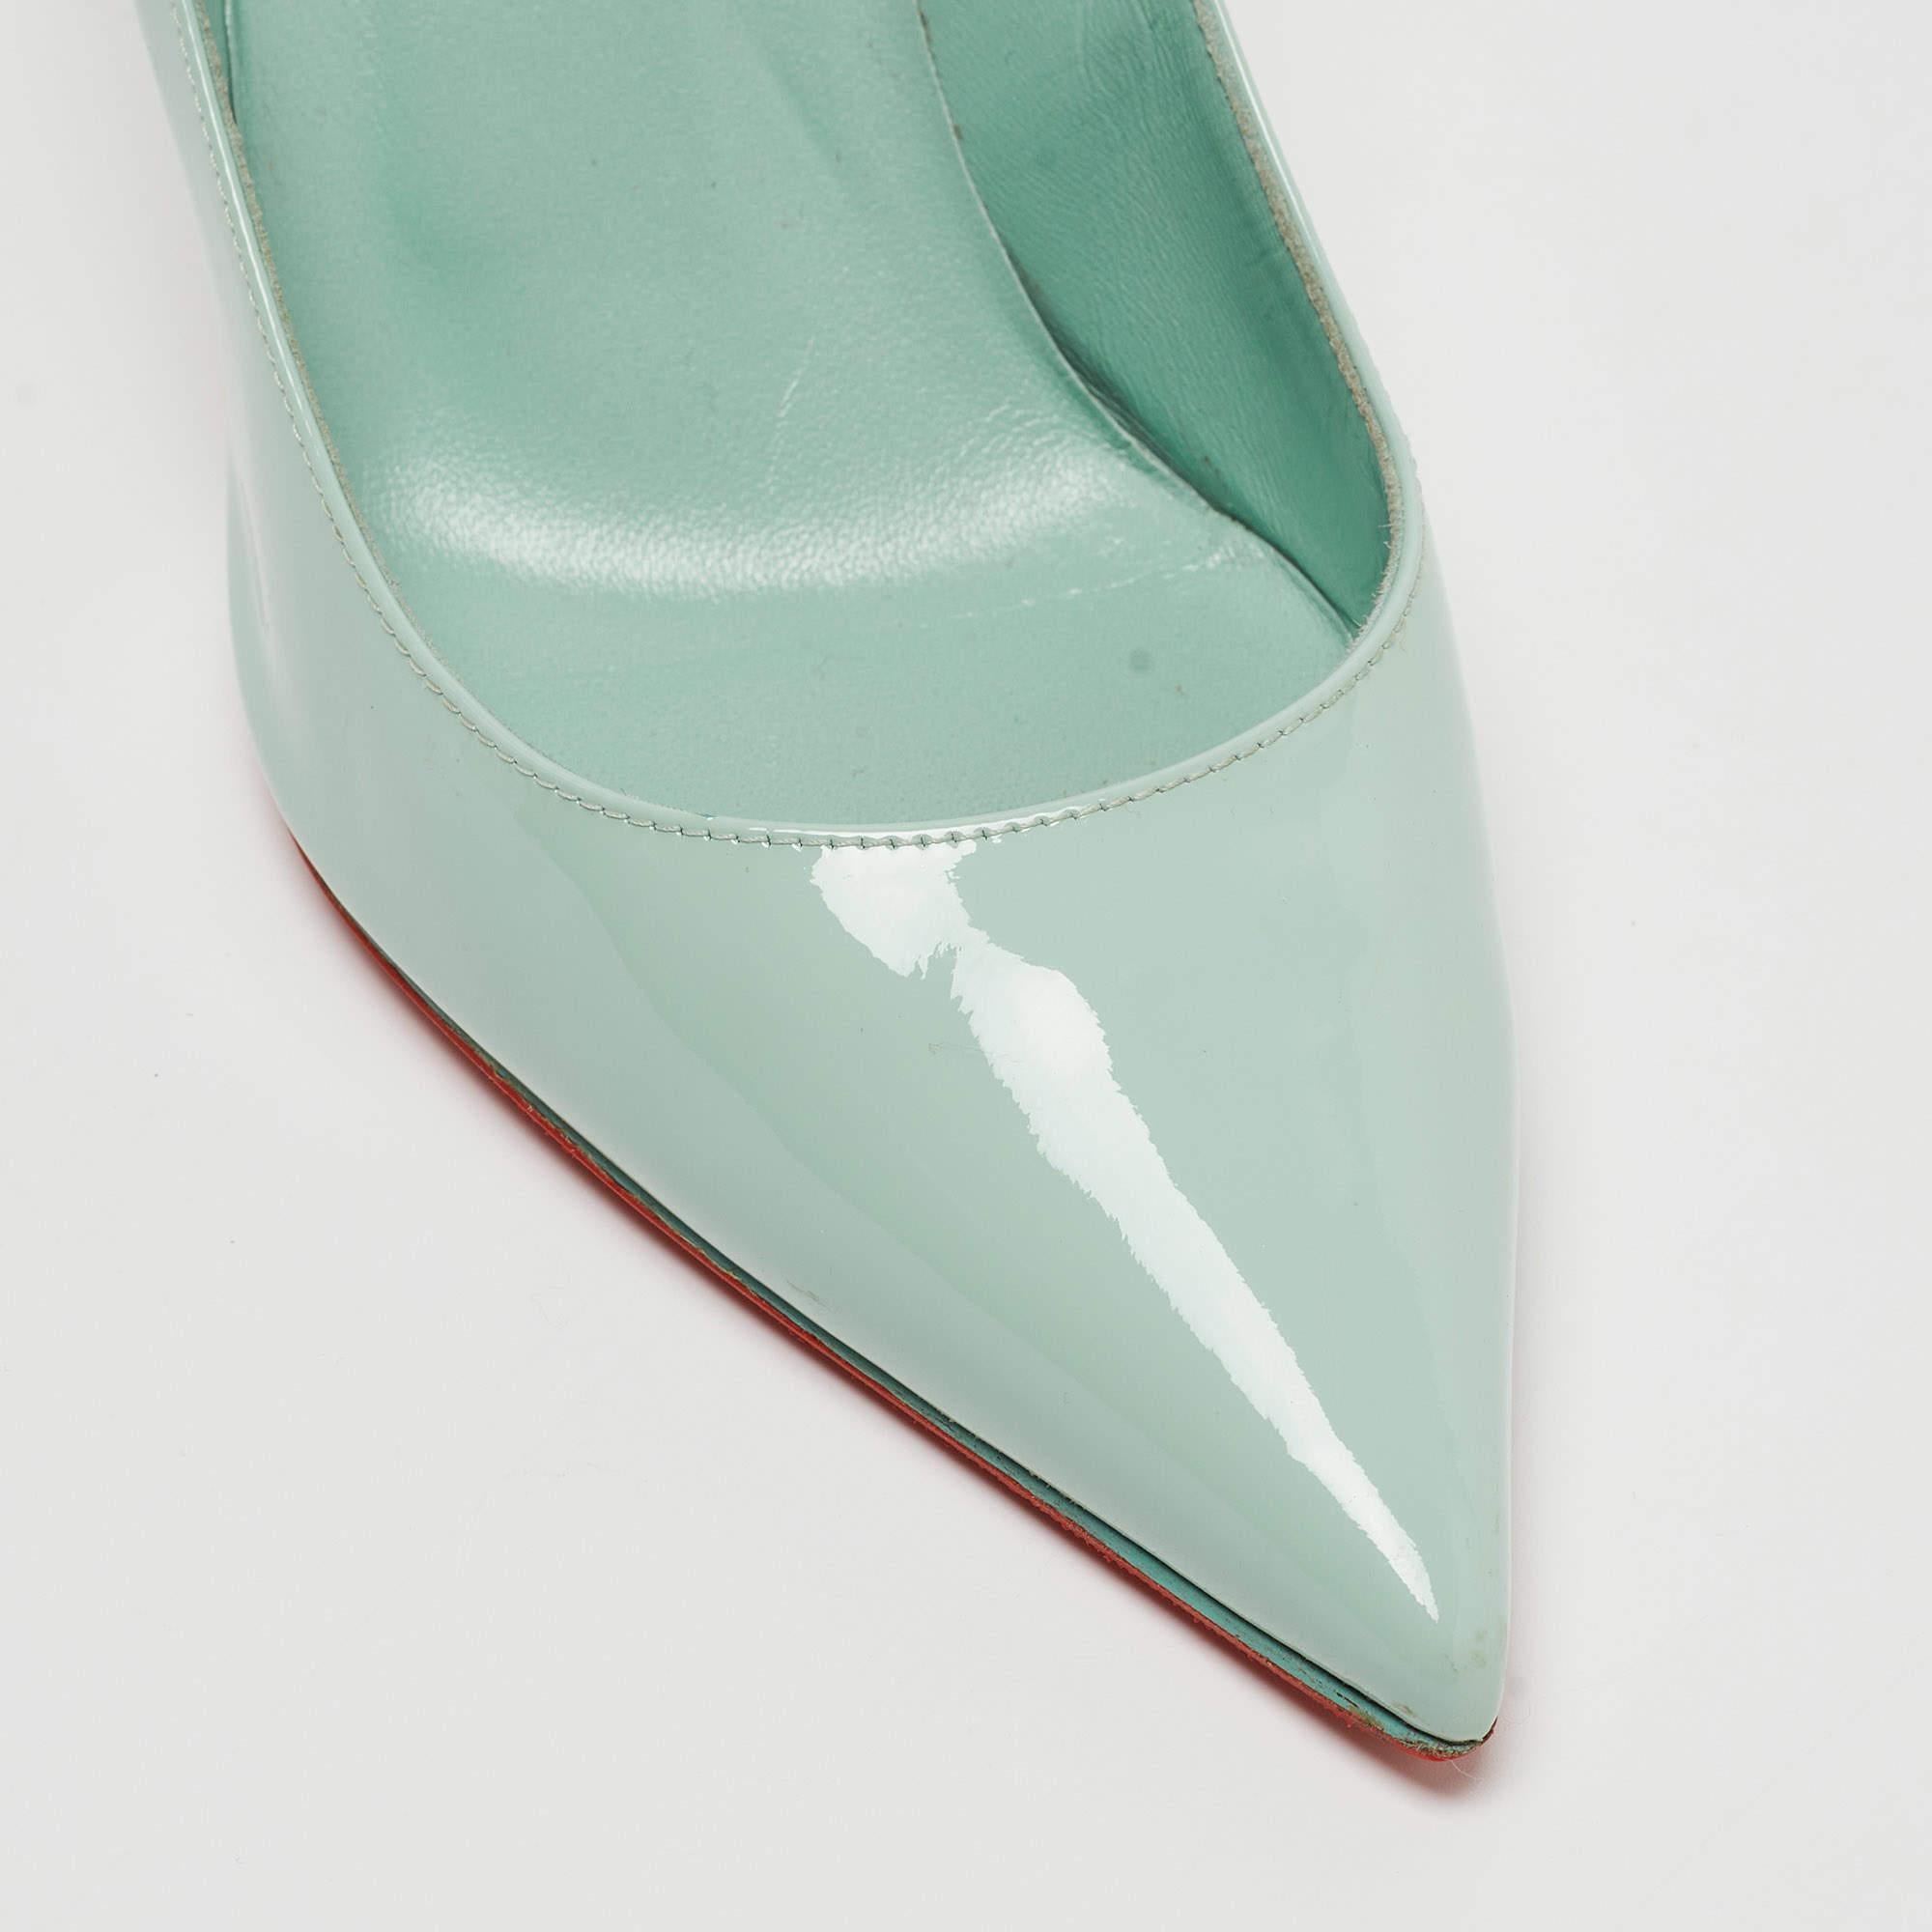 Christian Louboutin Light Green Patent Leather Pigalle Pointed Toe Pumps Size 38 1